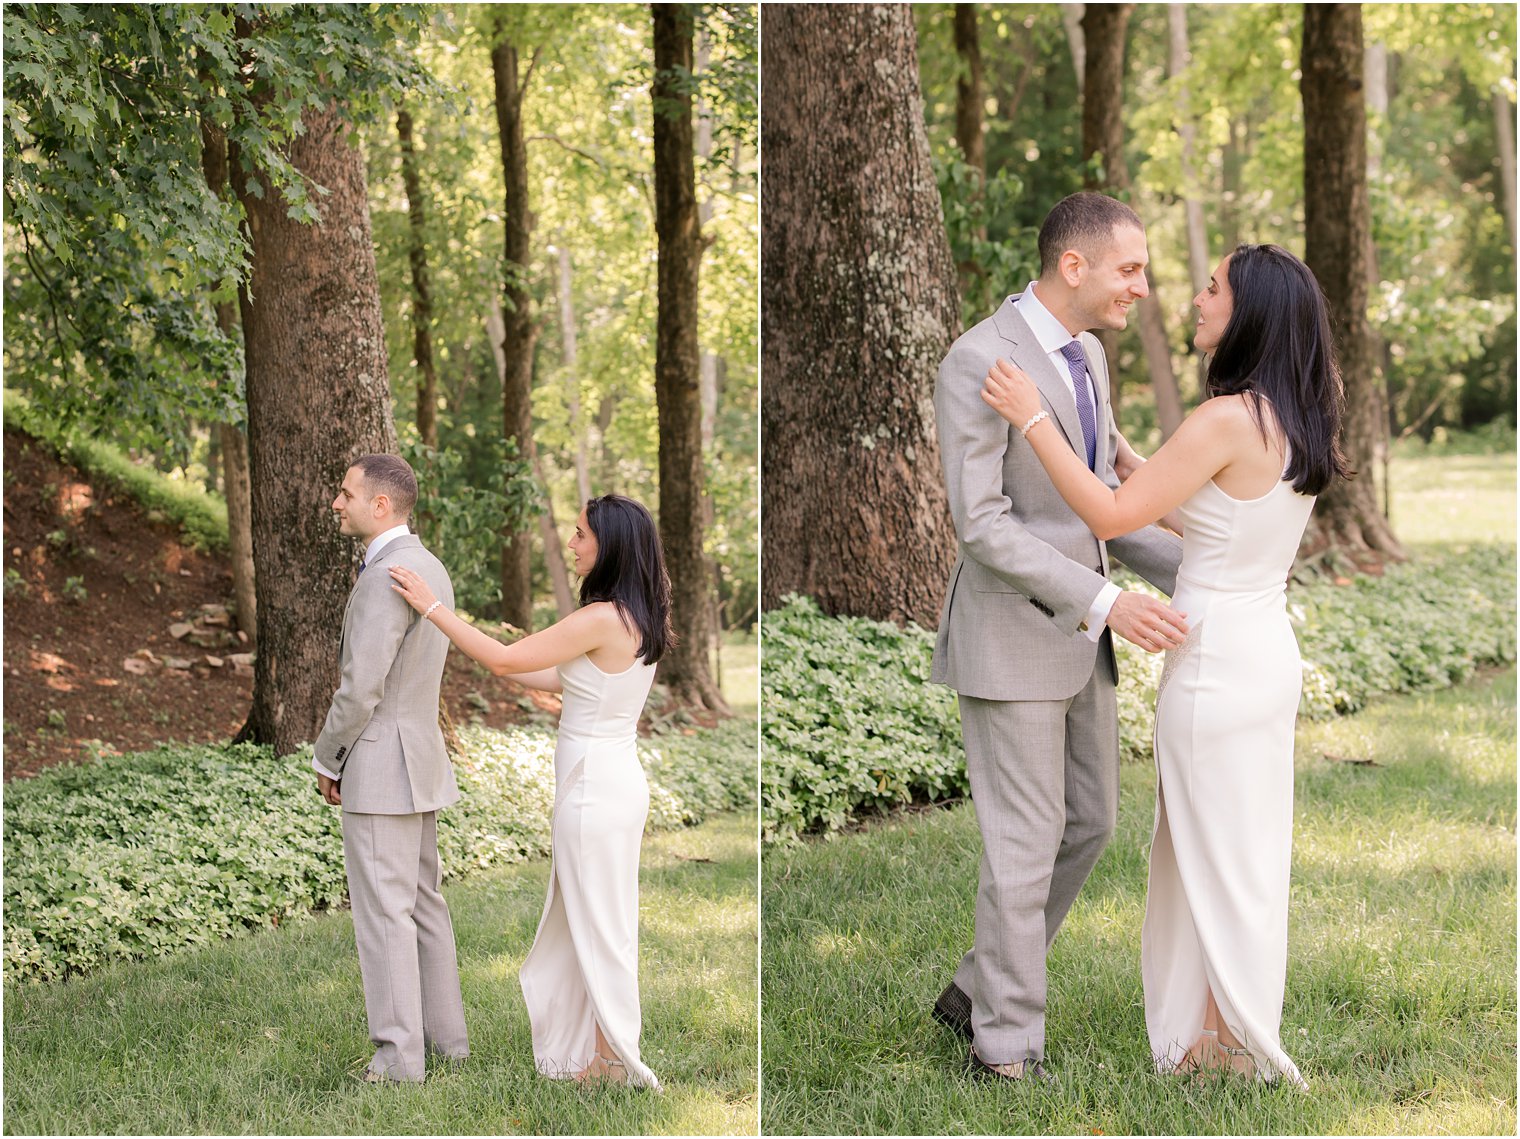 Bride and groom first look photos in New Hope PA micro wedding